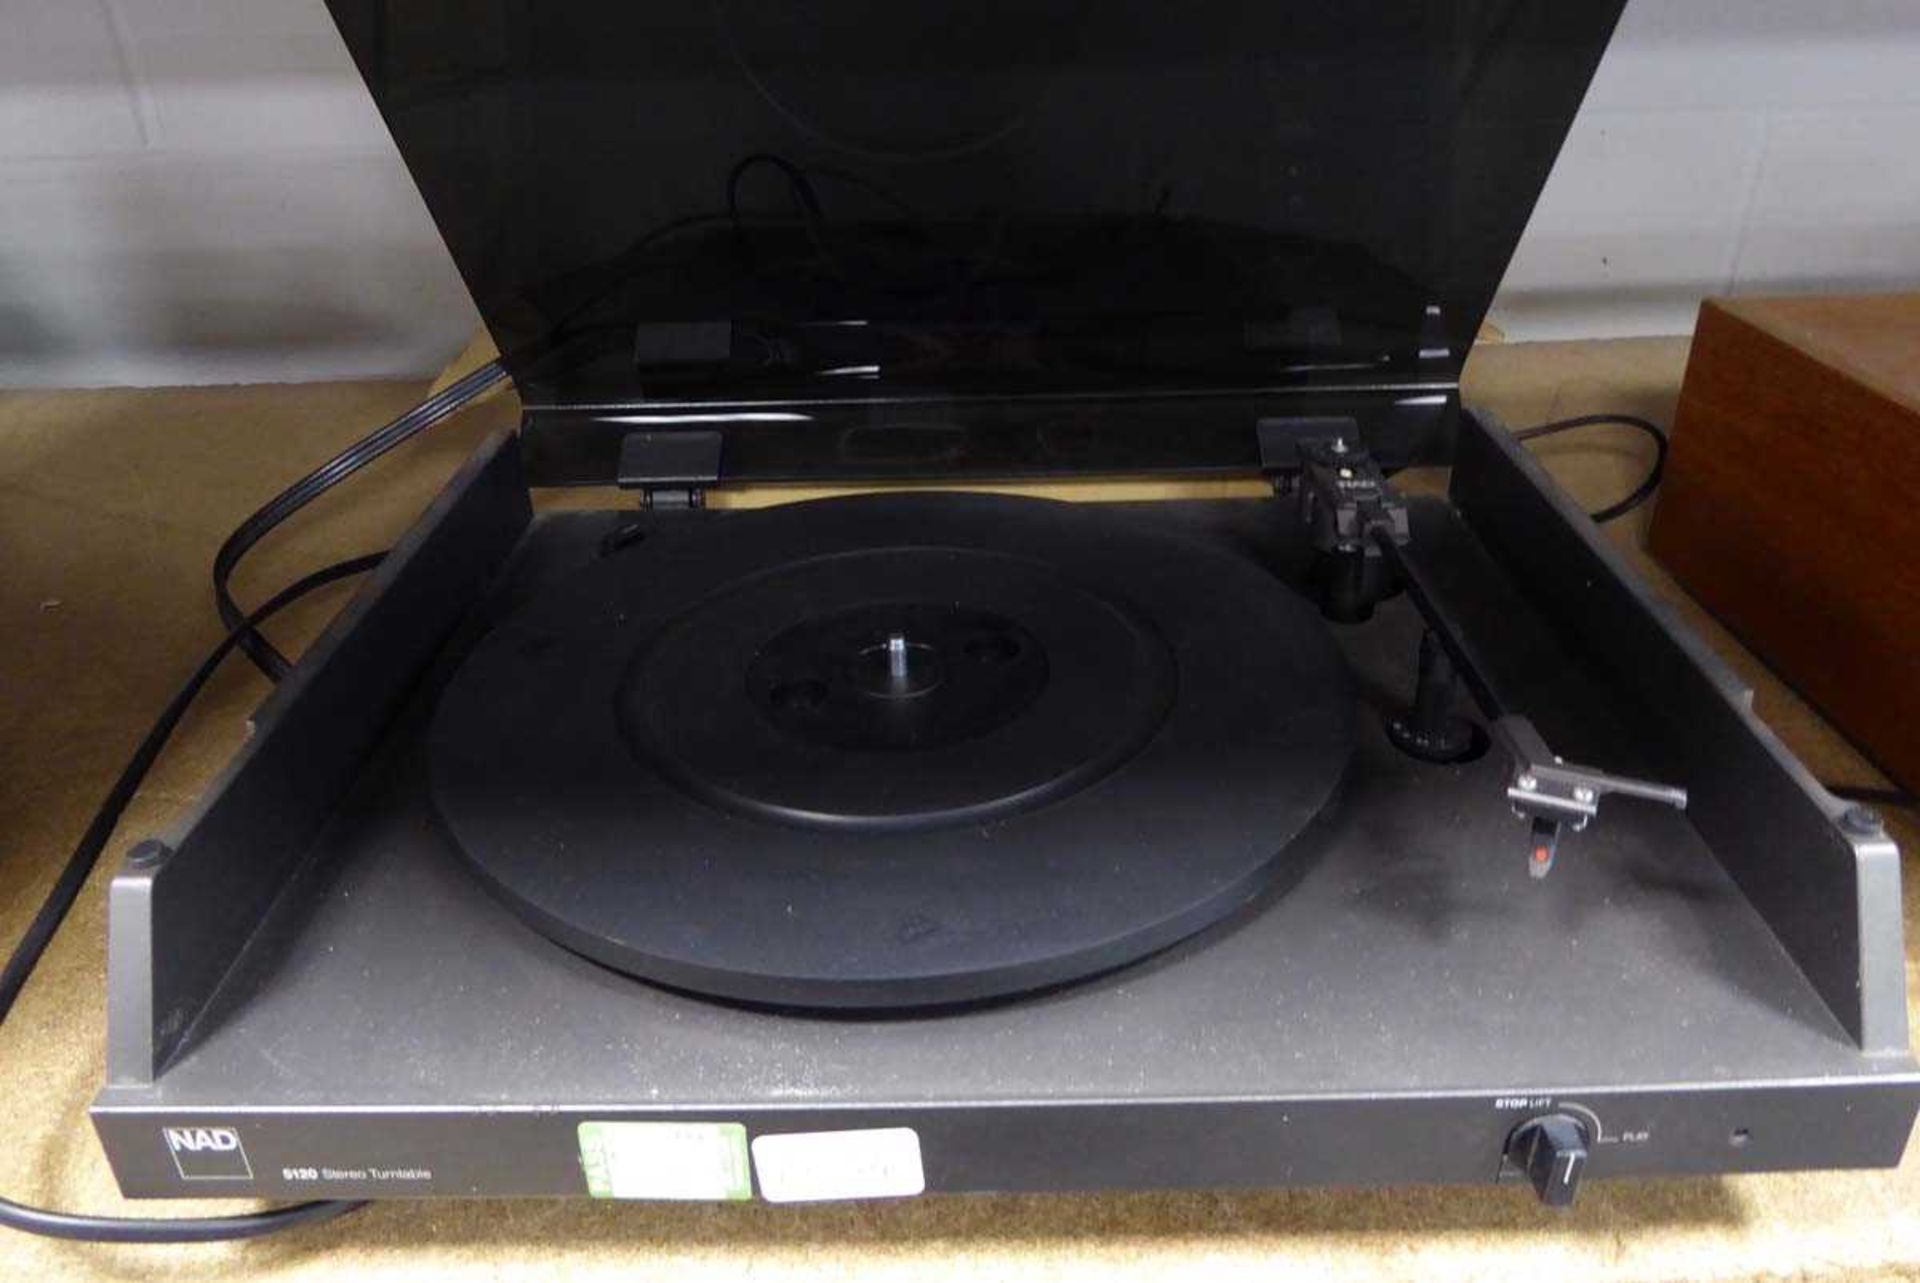 NAD 5120 stereo turntable with inout/output devices and wiring - Image 2 of 2